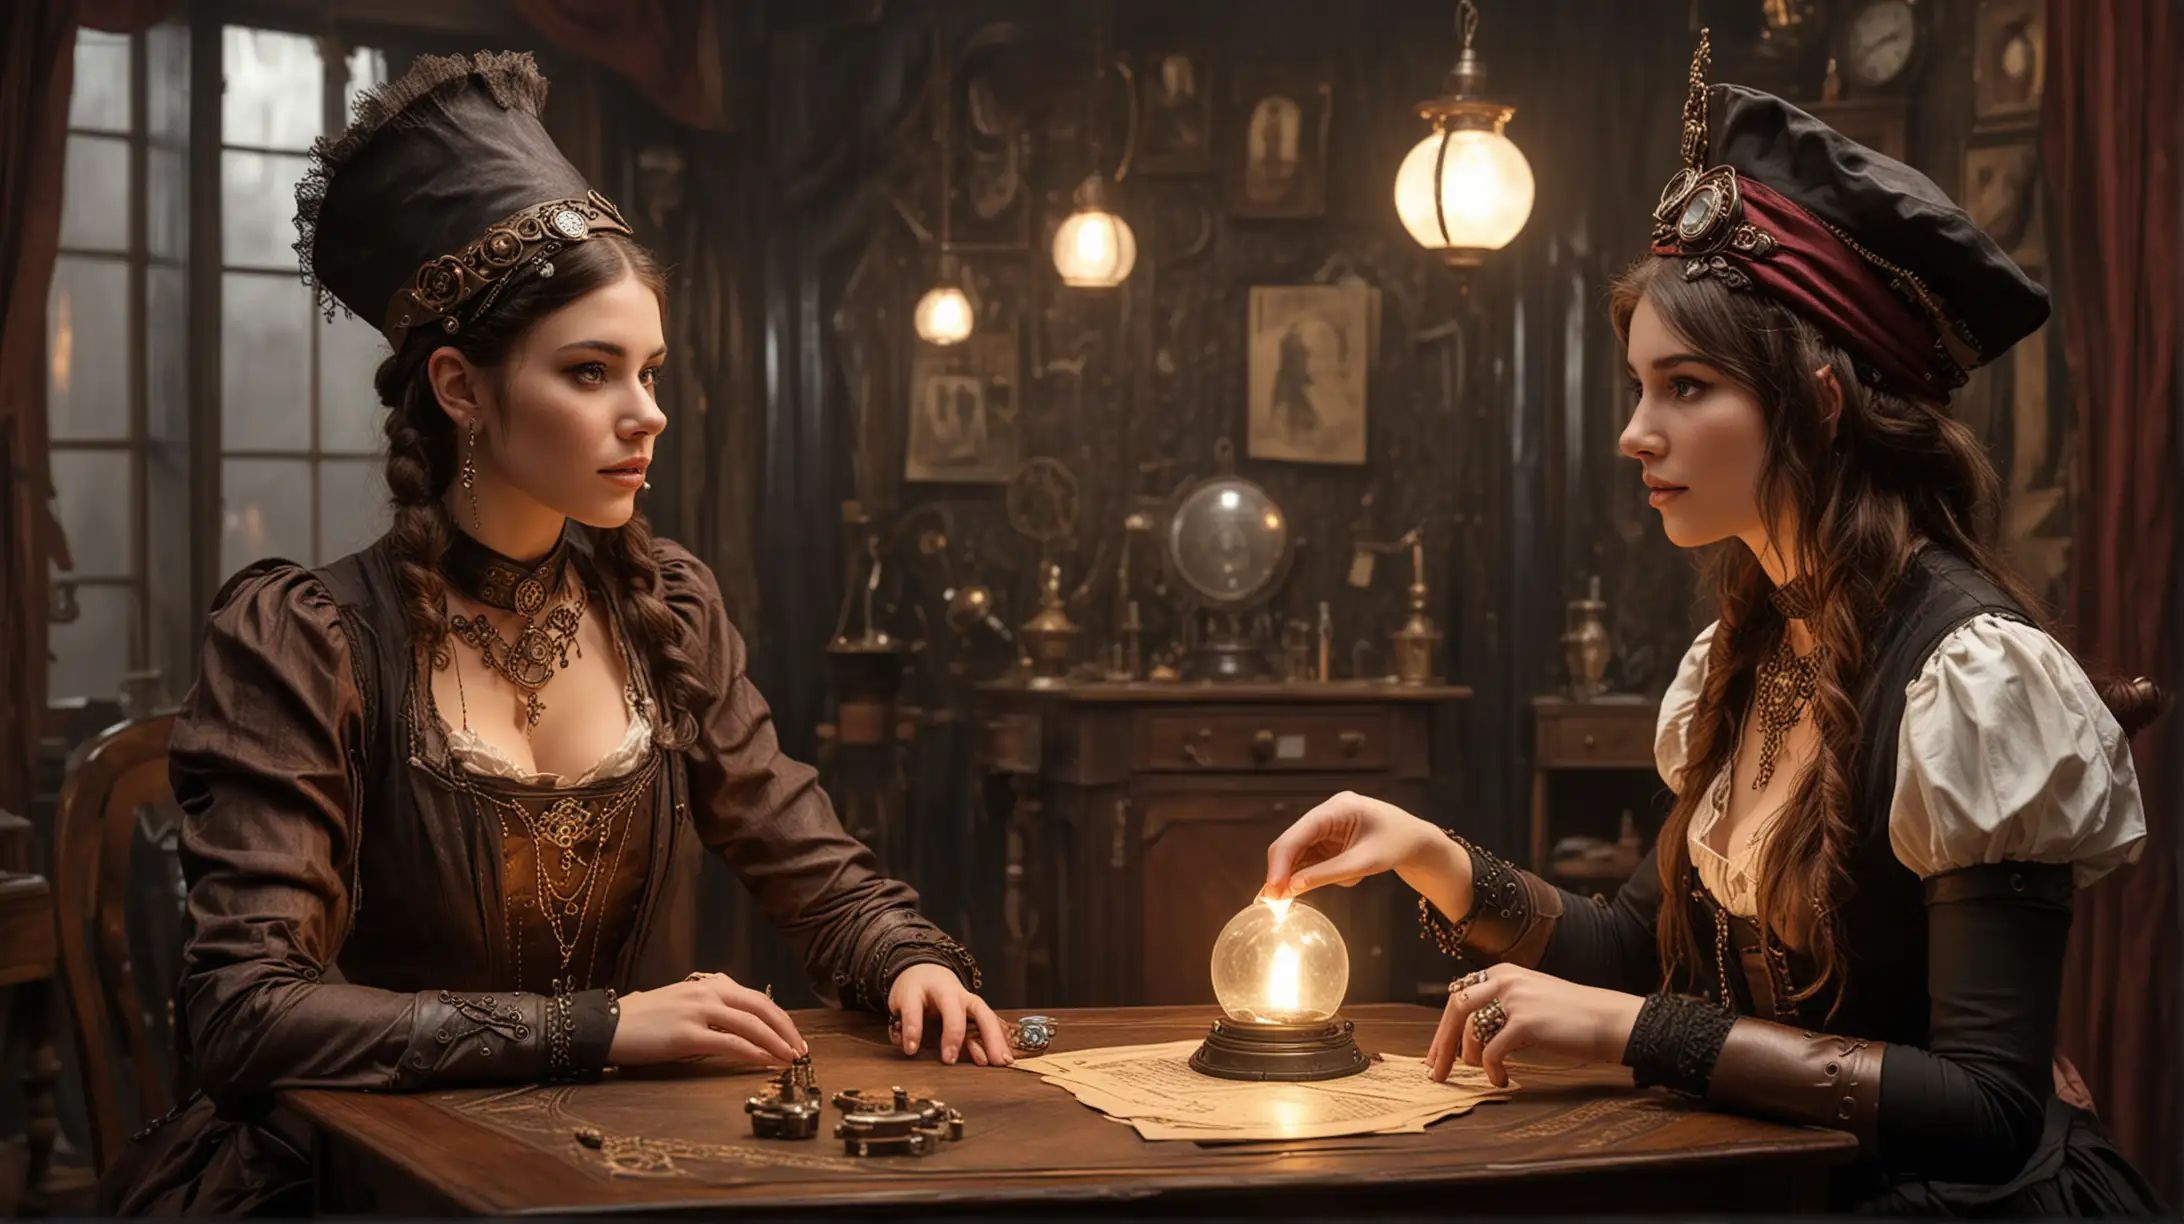 Steampunk Fortune Teller Predicts Future for Young Woman in Victorian Setting